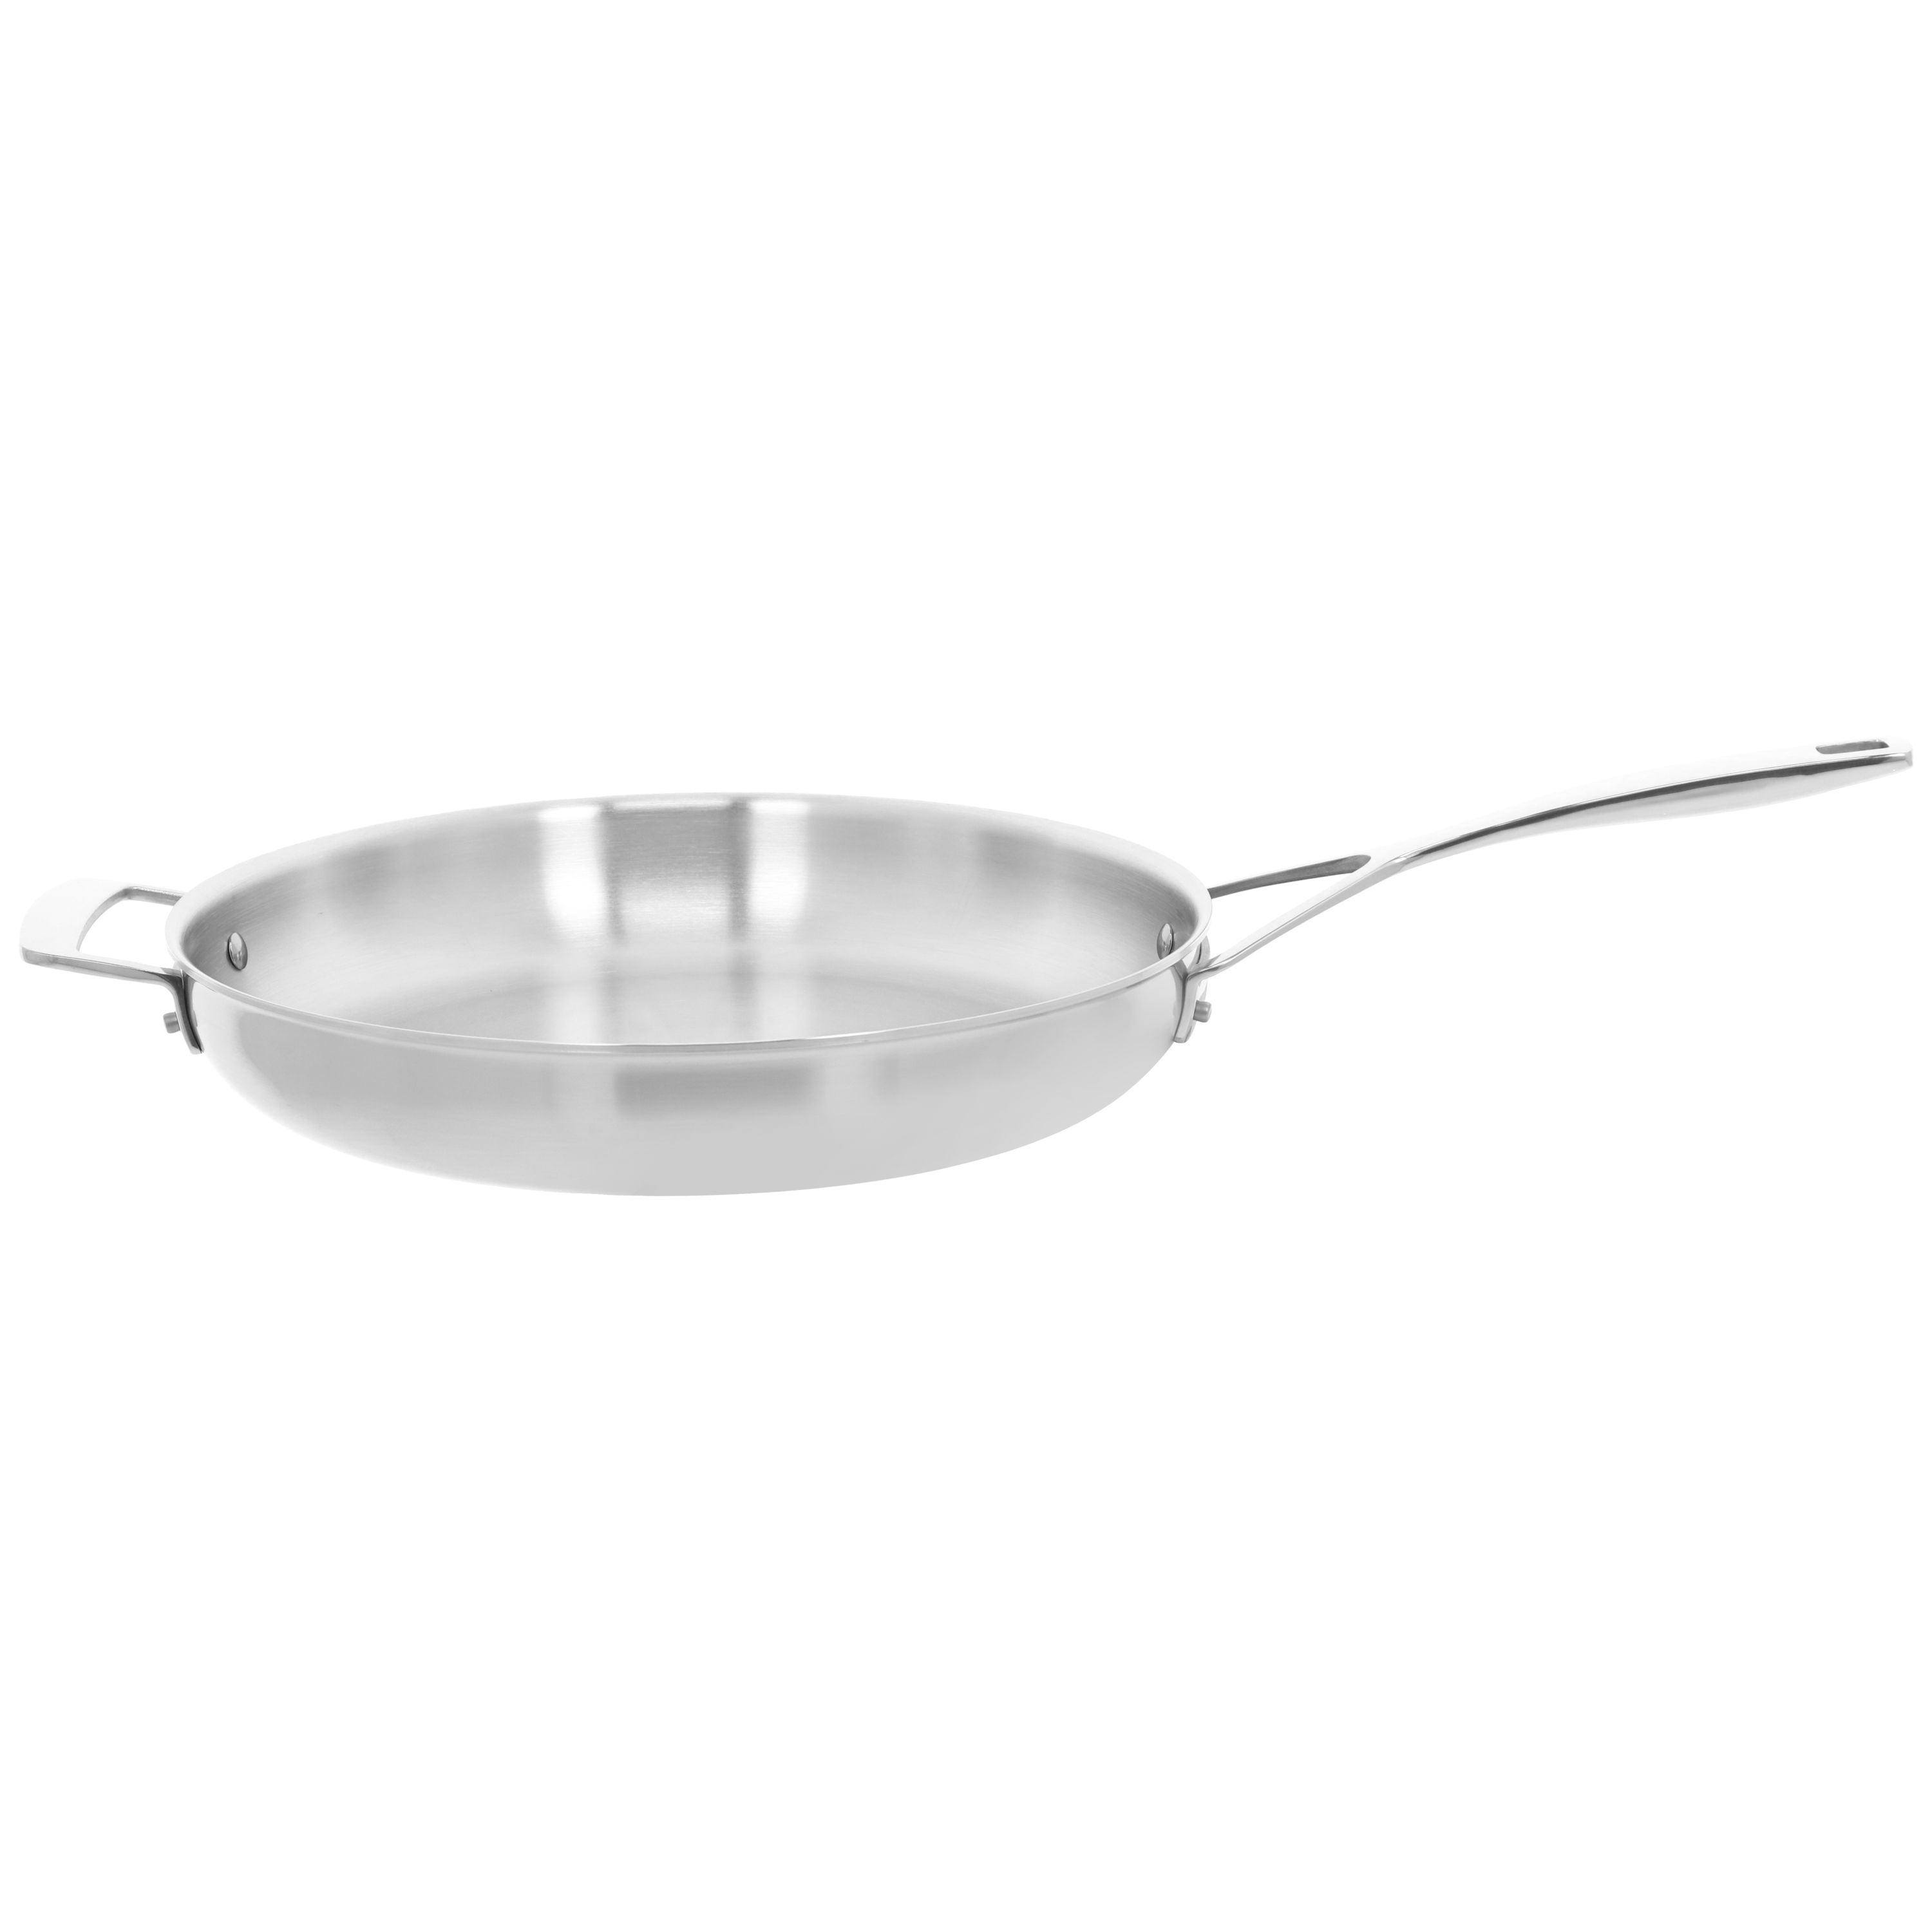 Demeyere Essential5 Stainless Steel 12.5 Frying Pan with Glass Lid